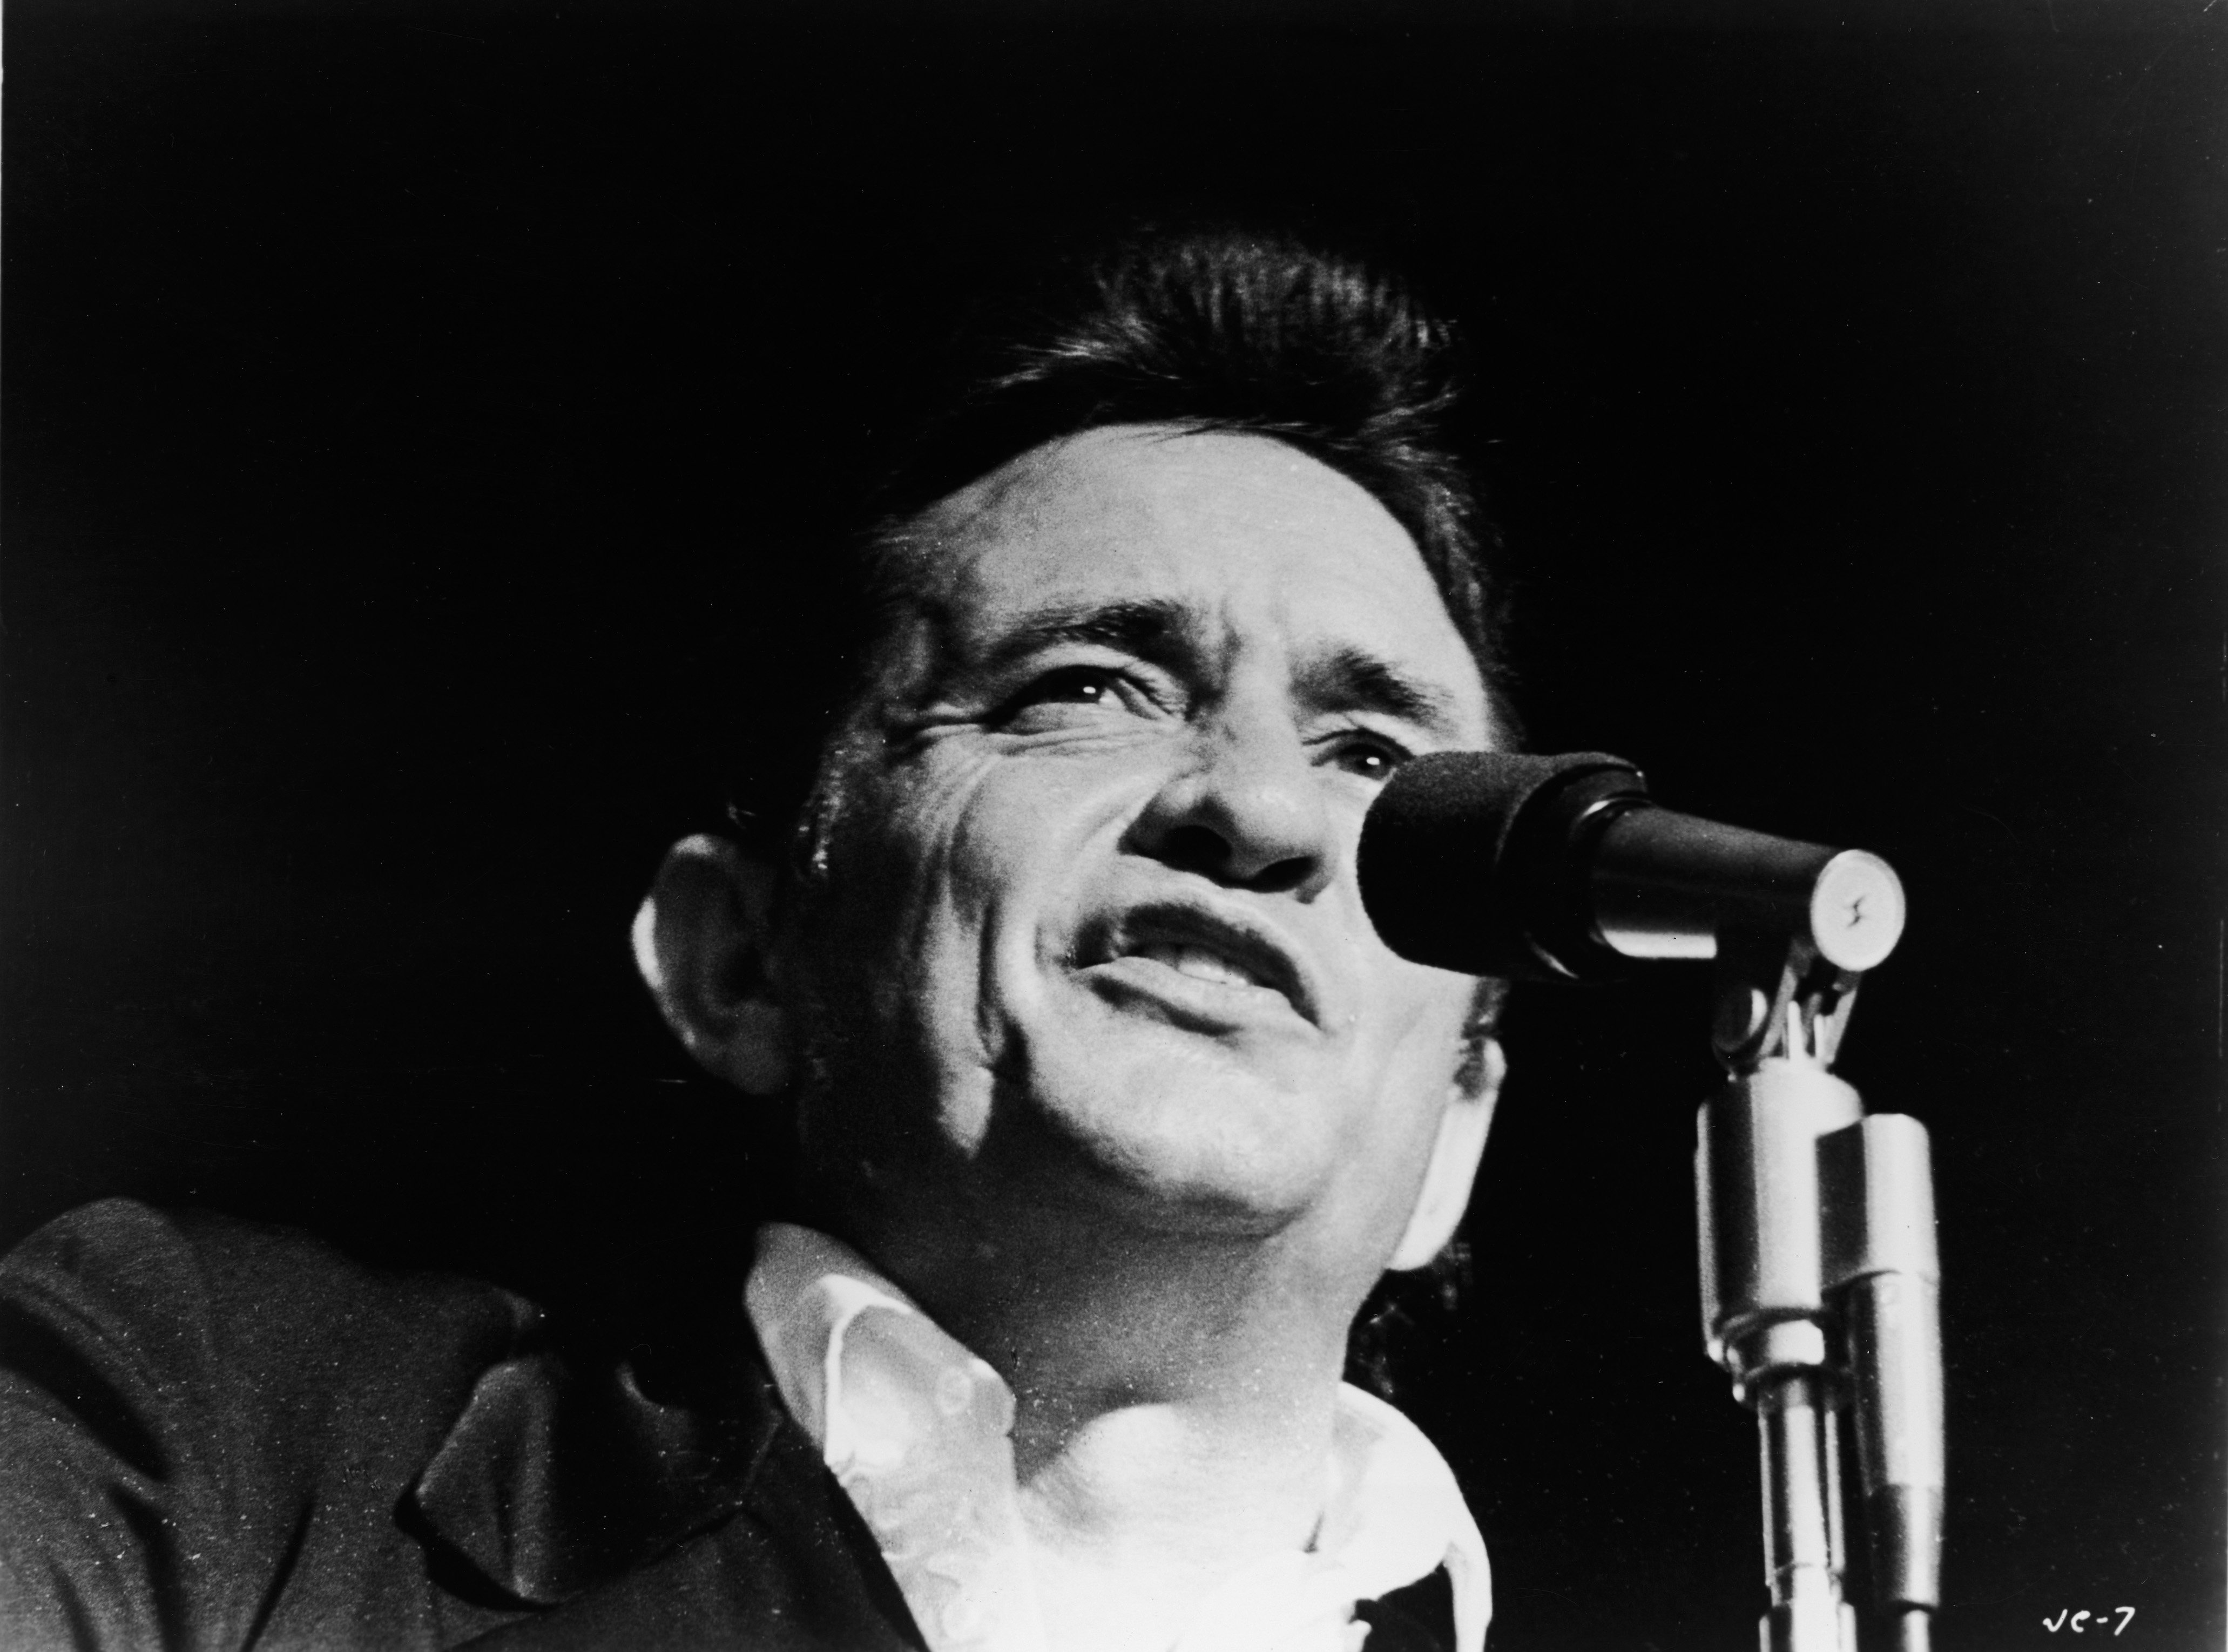 Johnny Cash sings at a microphone.